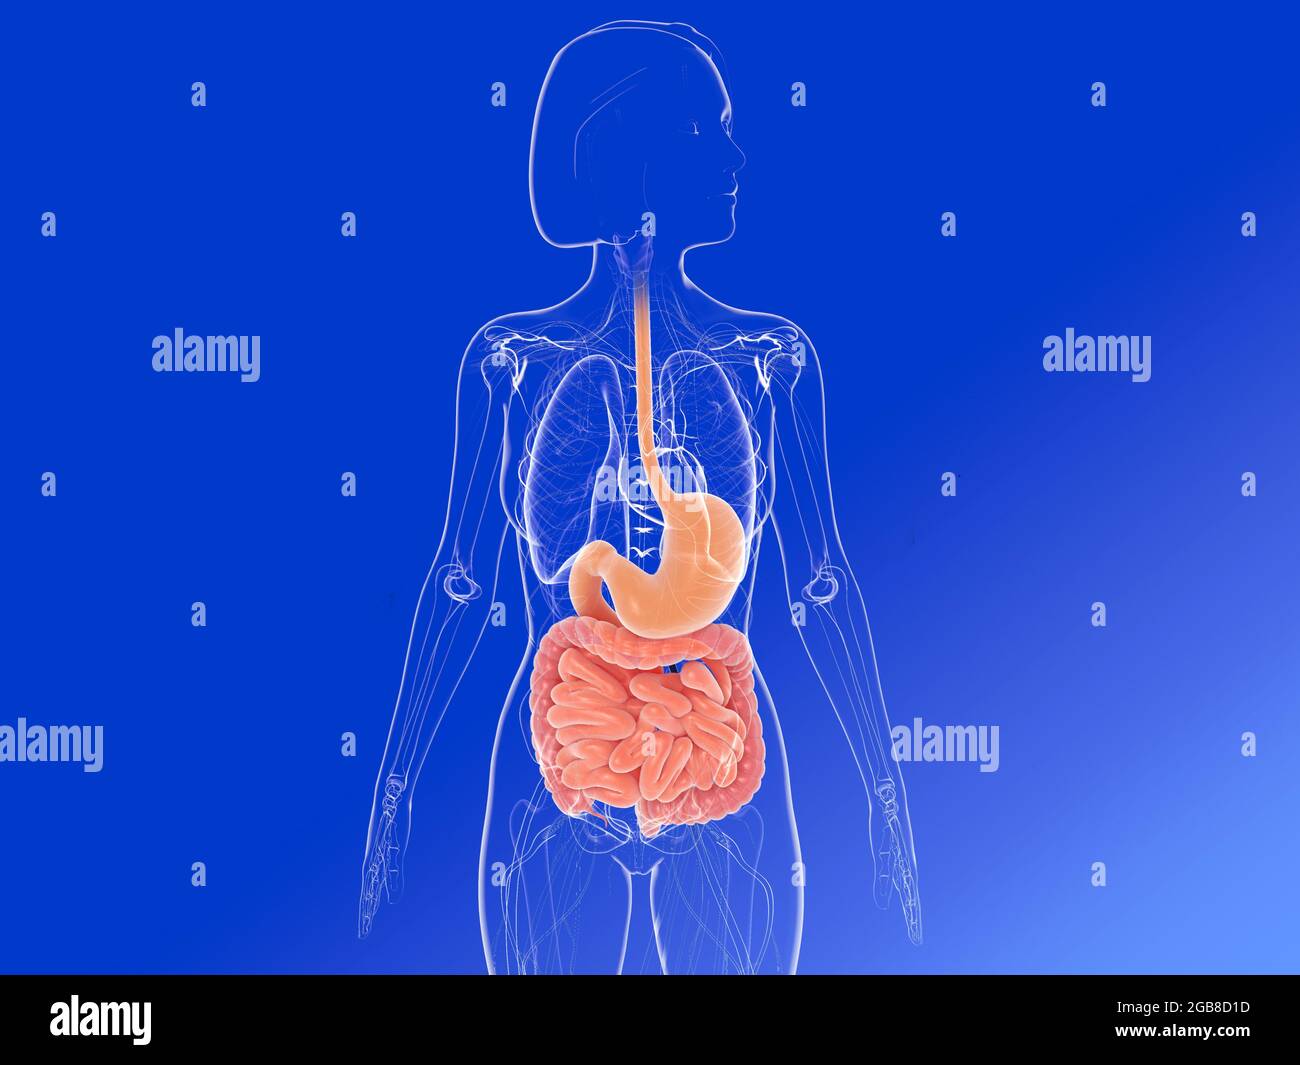 3D illustration of the female anatomy front view, showing the internal organs highlighting the stomach and intestines. Transparent image. Stock Photo